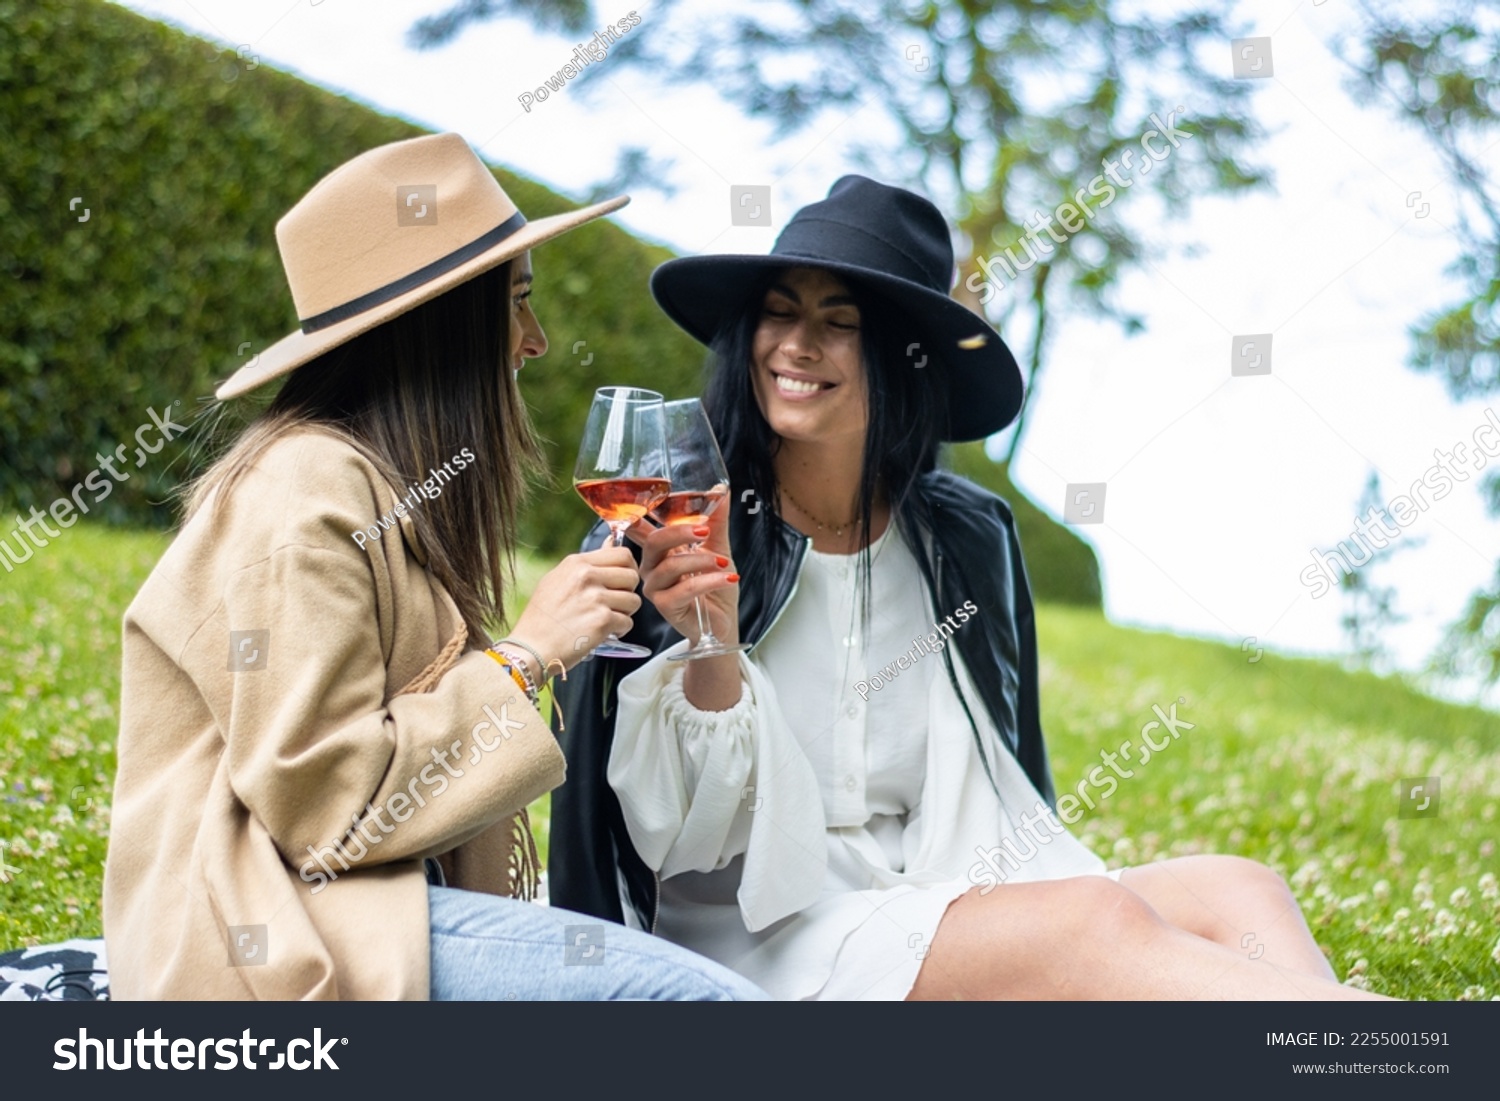 Portrait of two funny friends having a good time drinking wine and laughing in the park. #2255001591